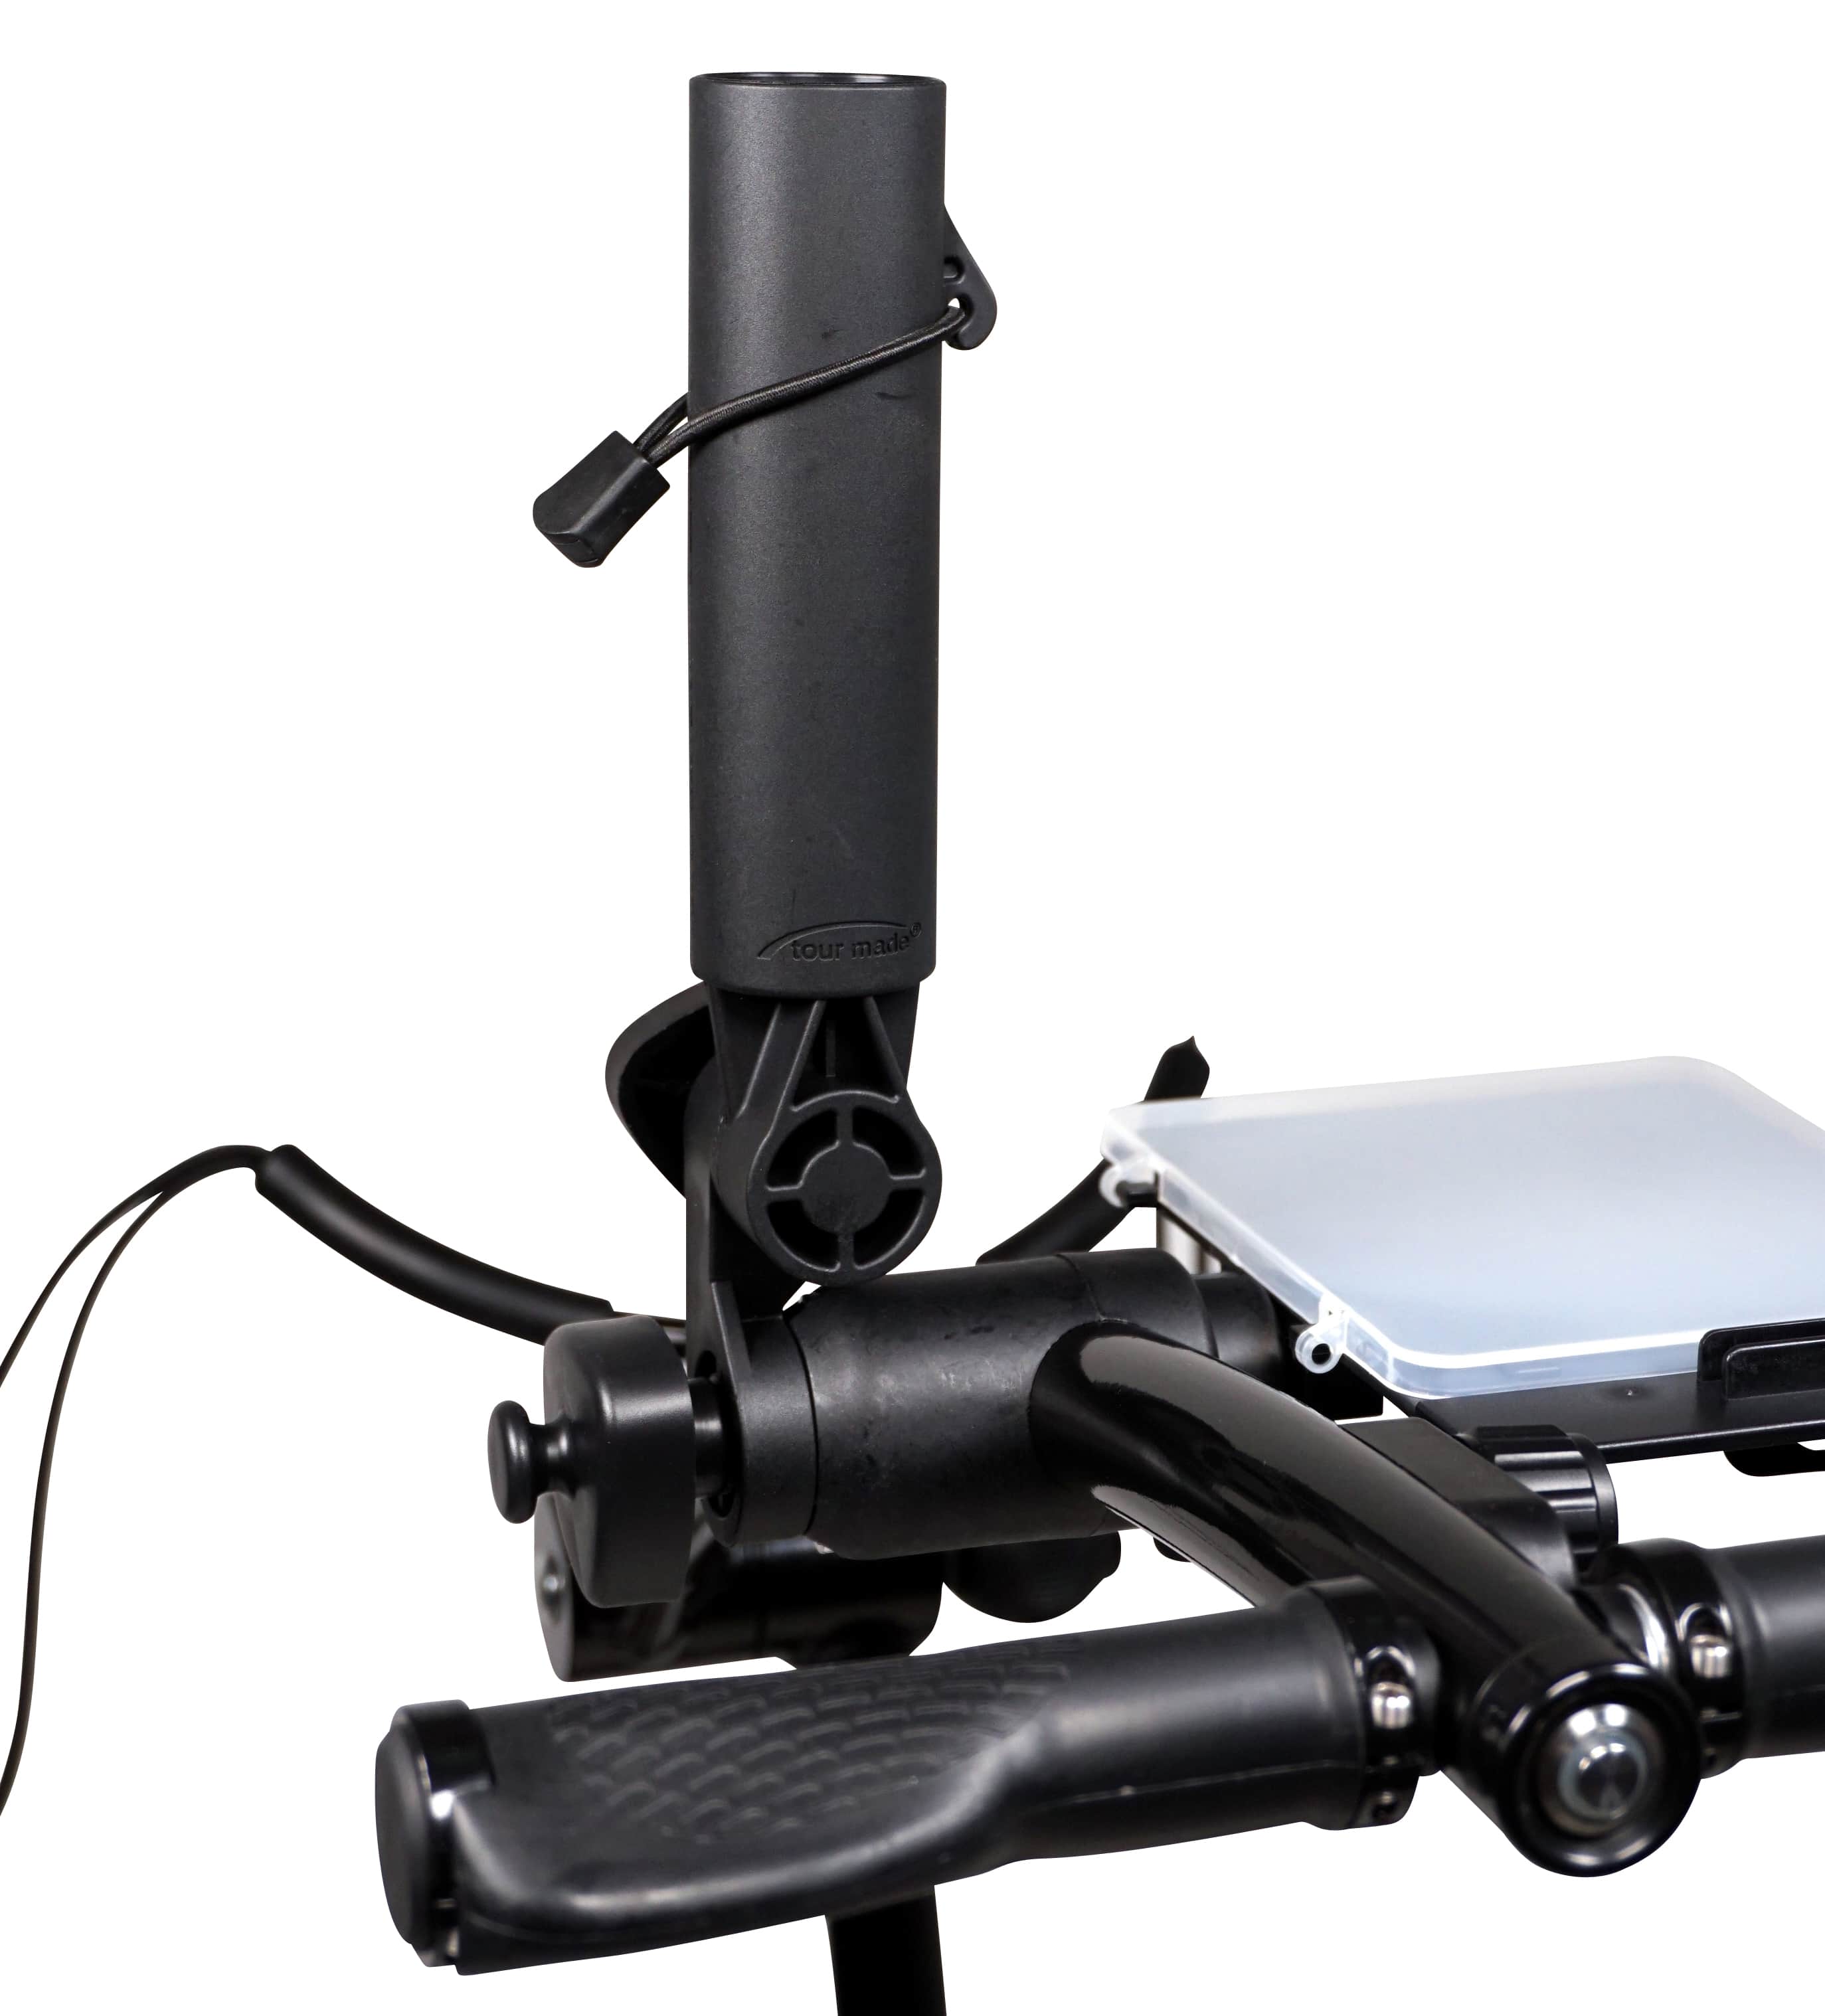 Tour Made RT-610S electric golf trolley